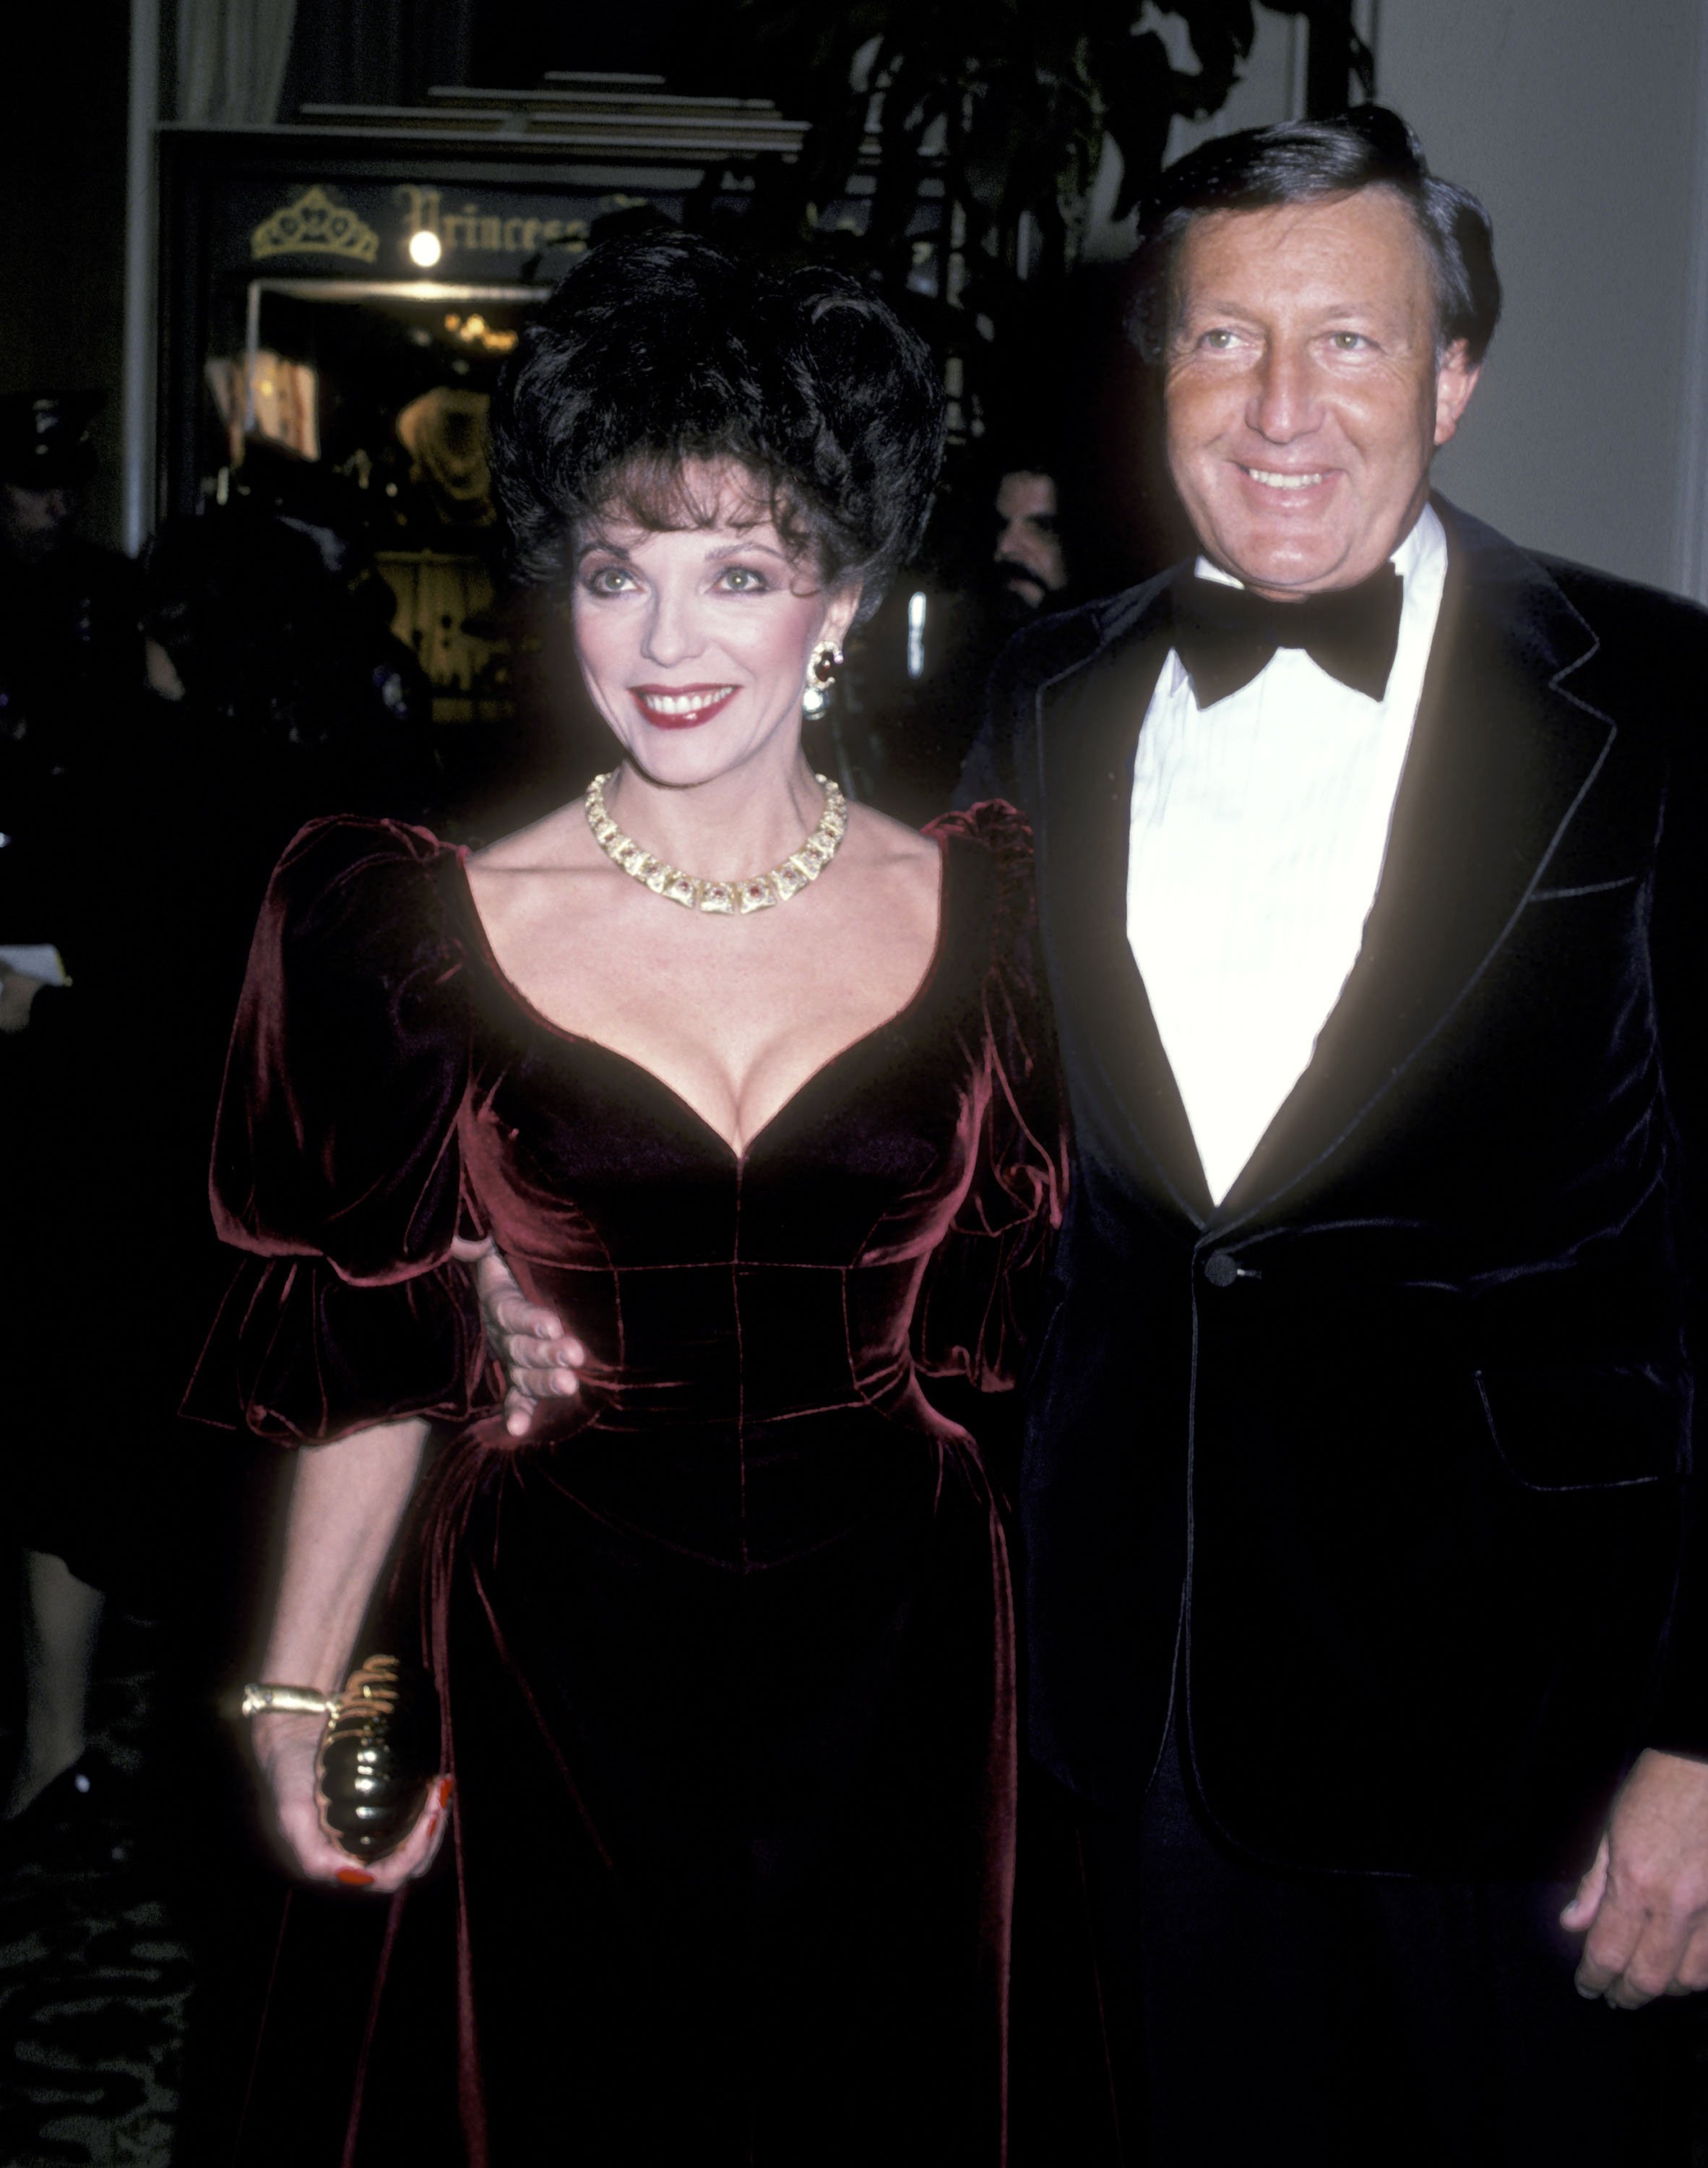 Joan Collins and her husband Ronald S. Kass during the 39th Annual Golden Globe Awards at Beverly Hilton Hotel on January 30, 1982 in Beverly Hills, California. | Source: Getty Images